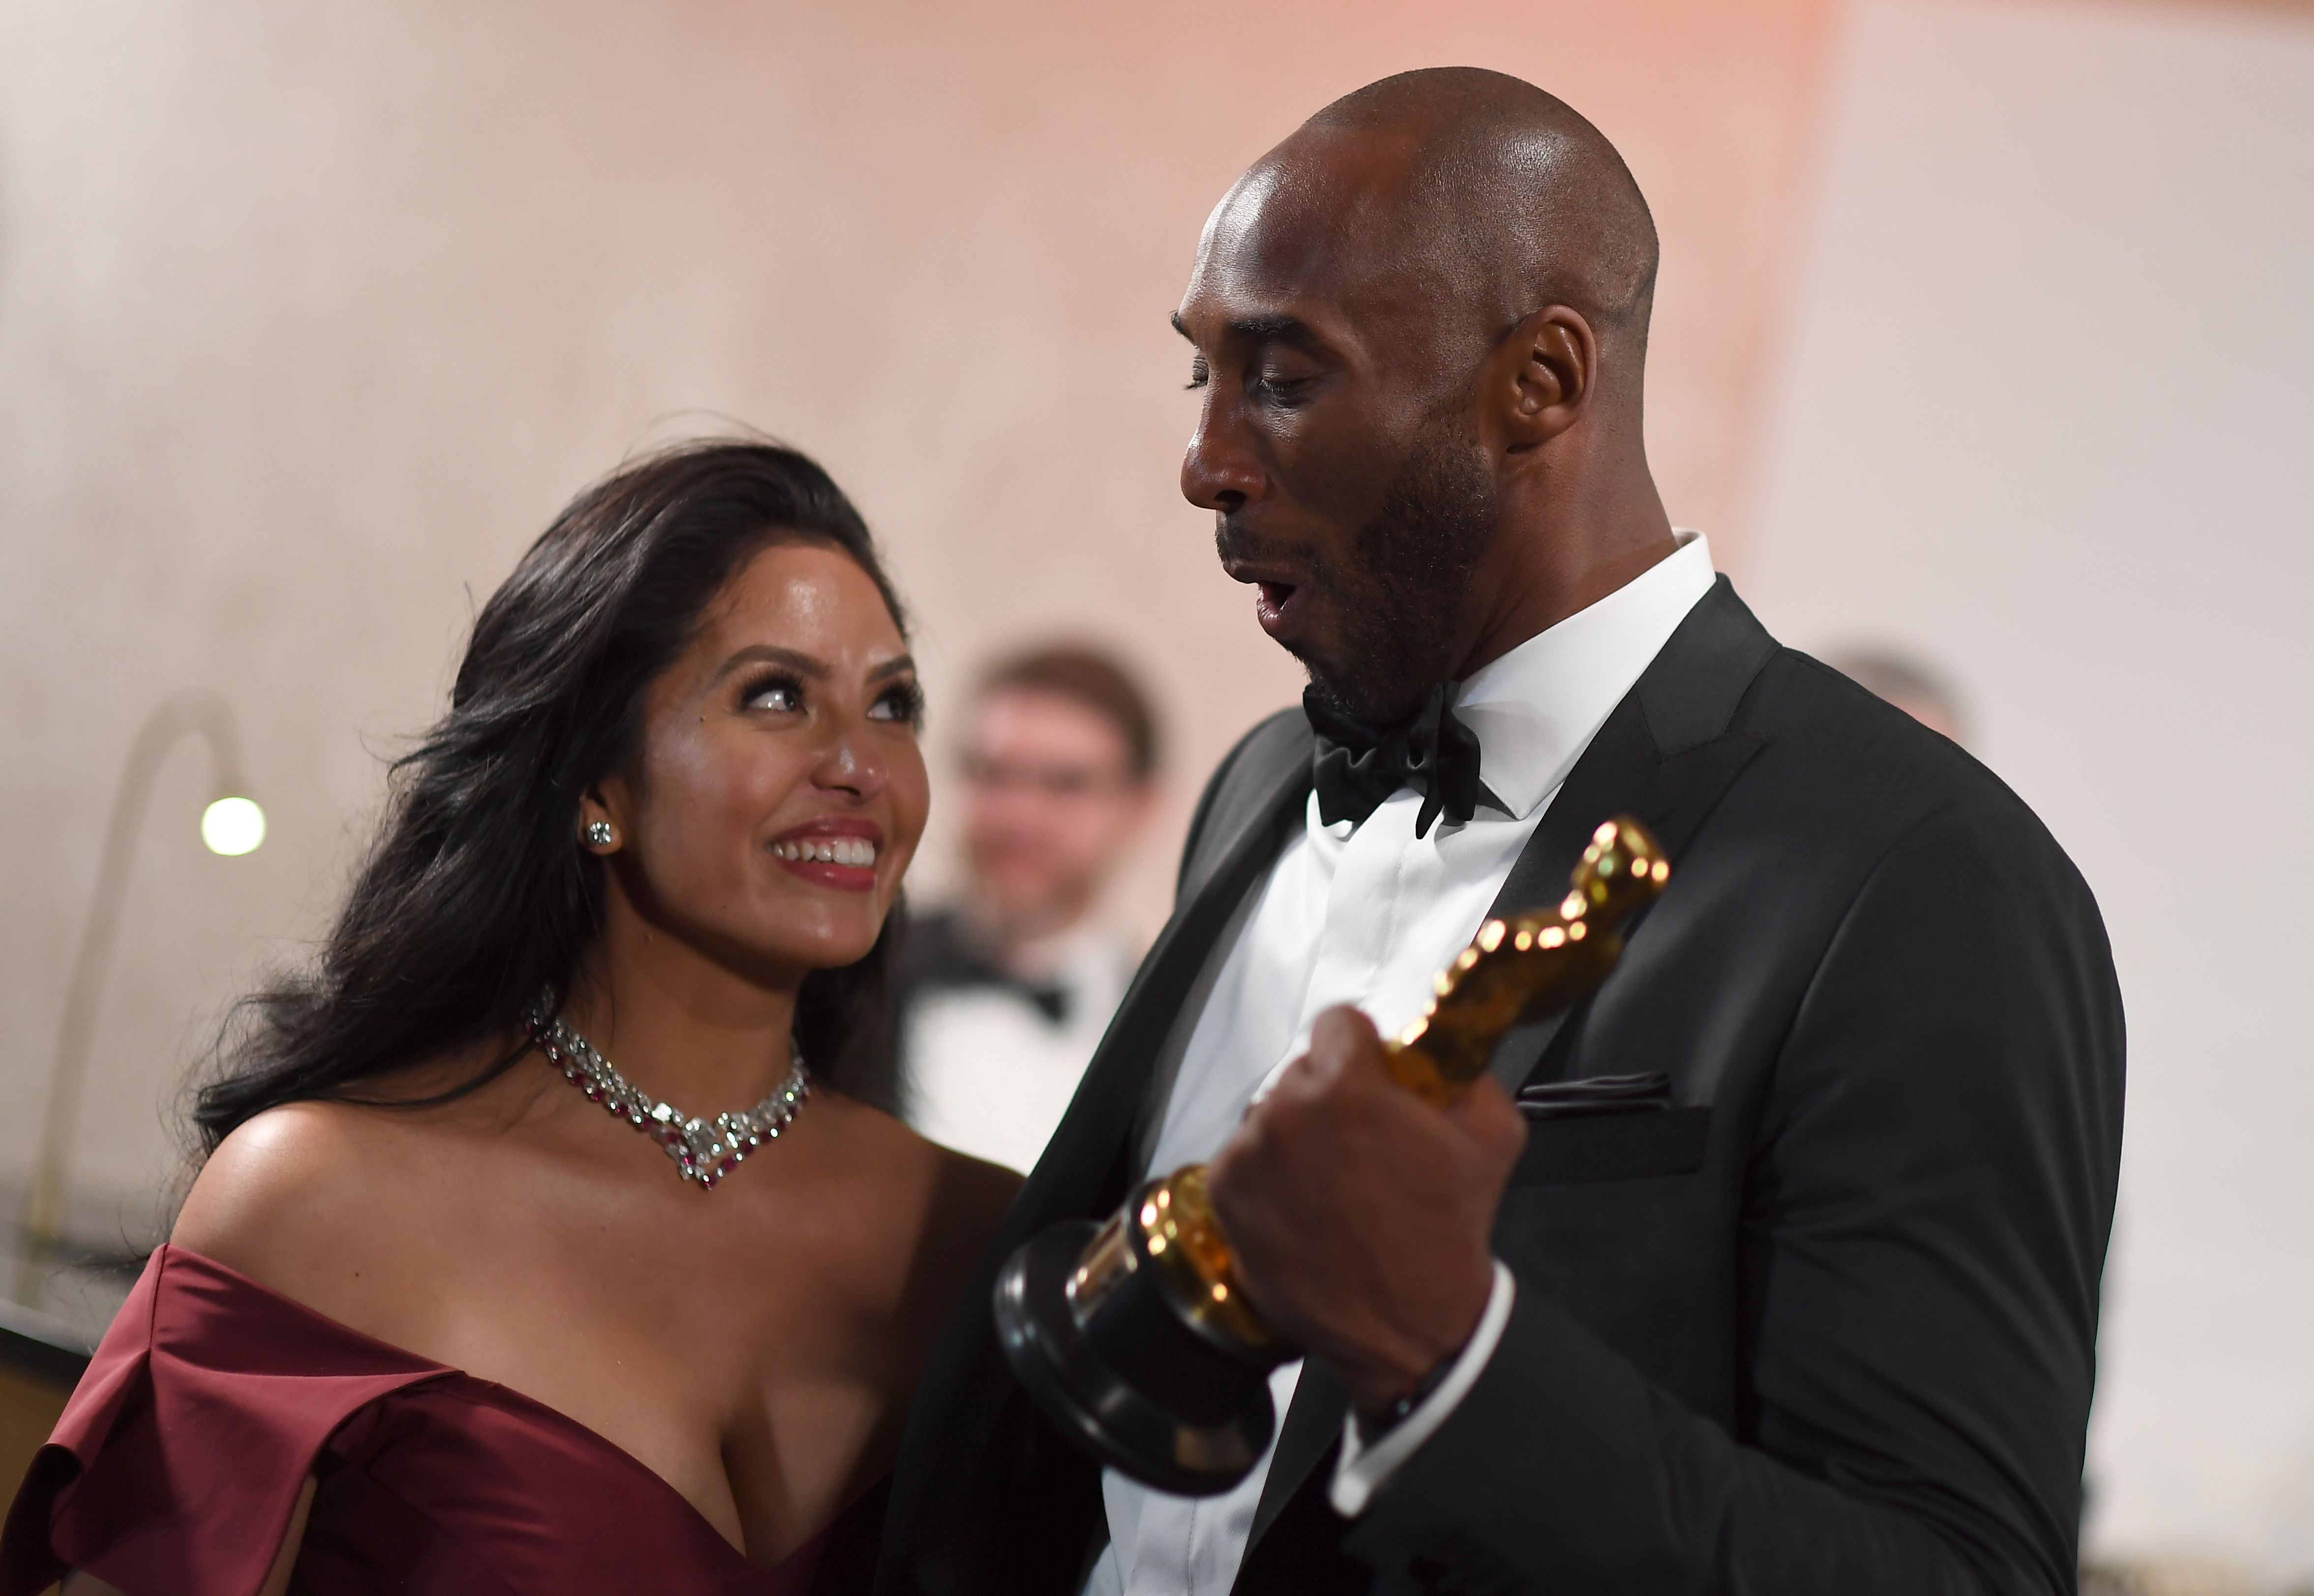  US actor and basketball player Kobe Bryant (R) holds an oscar beside his wife Vanessa Laine Bryant during the 90th Annual Academy Awards on March 4, 2018, in Hollywood, California.